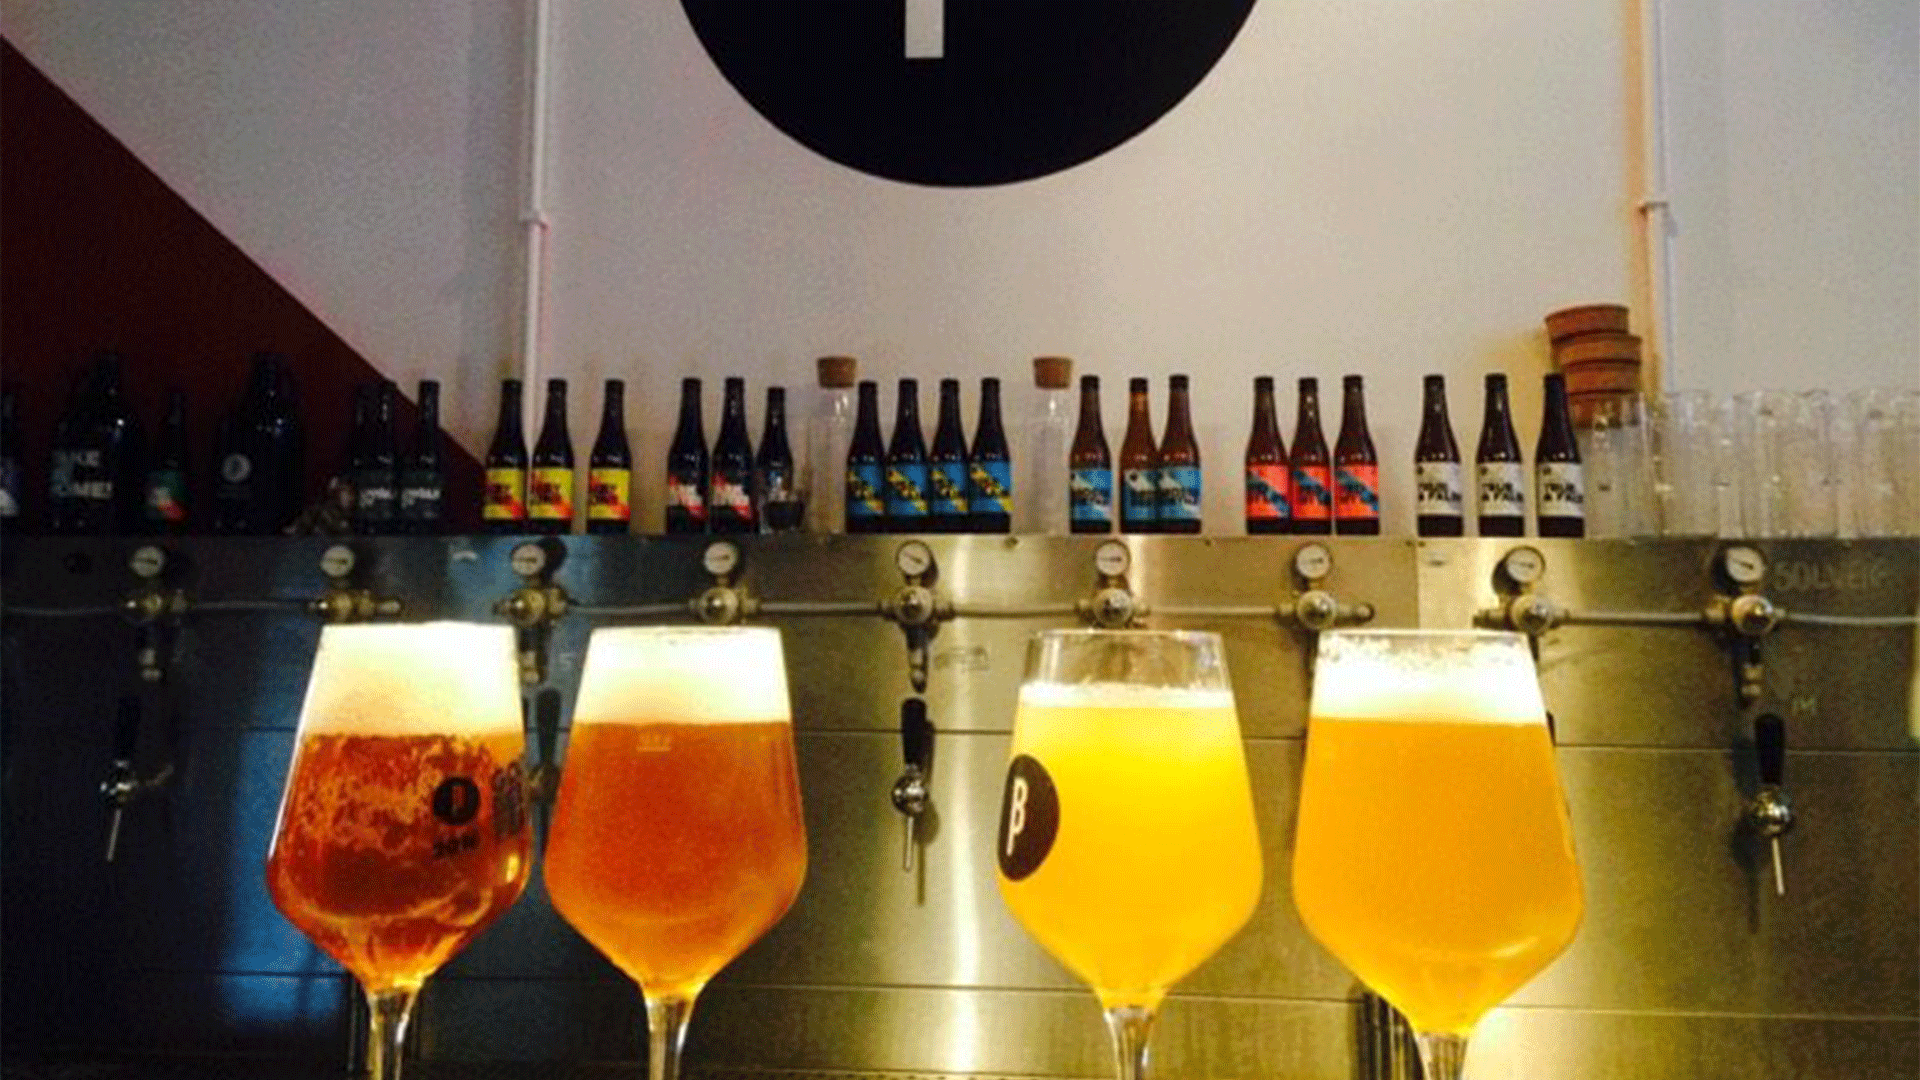 Brussels Beer Project by Sarah Filion